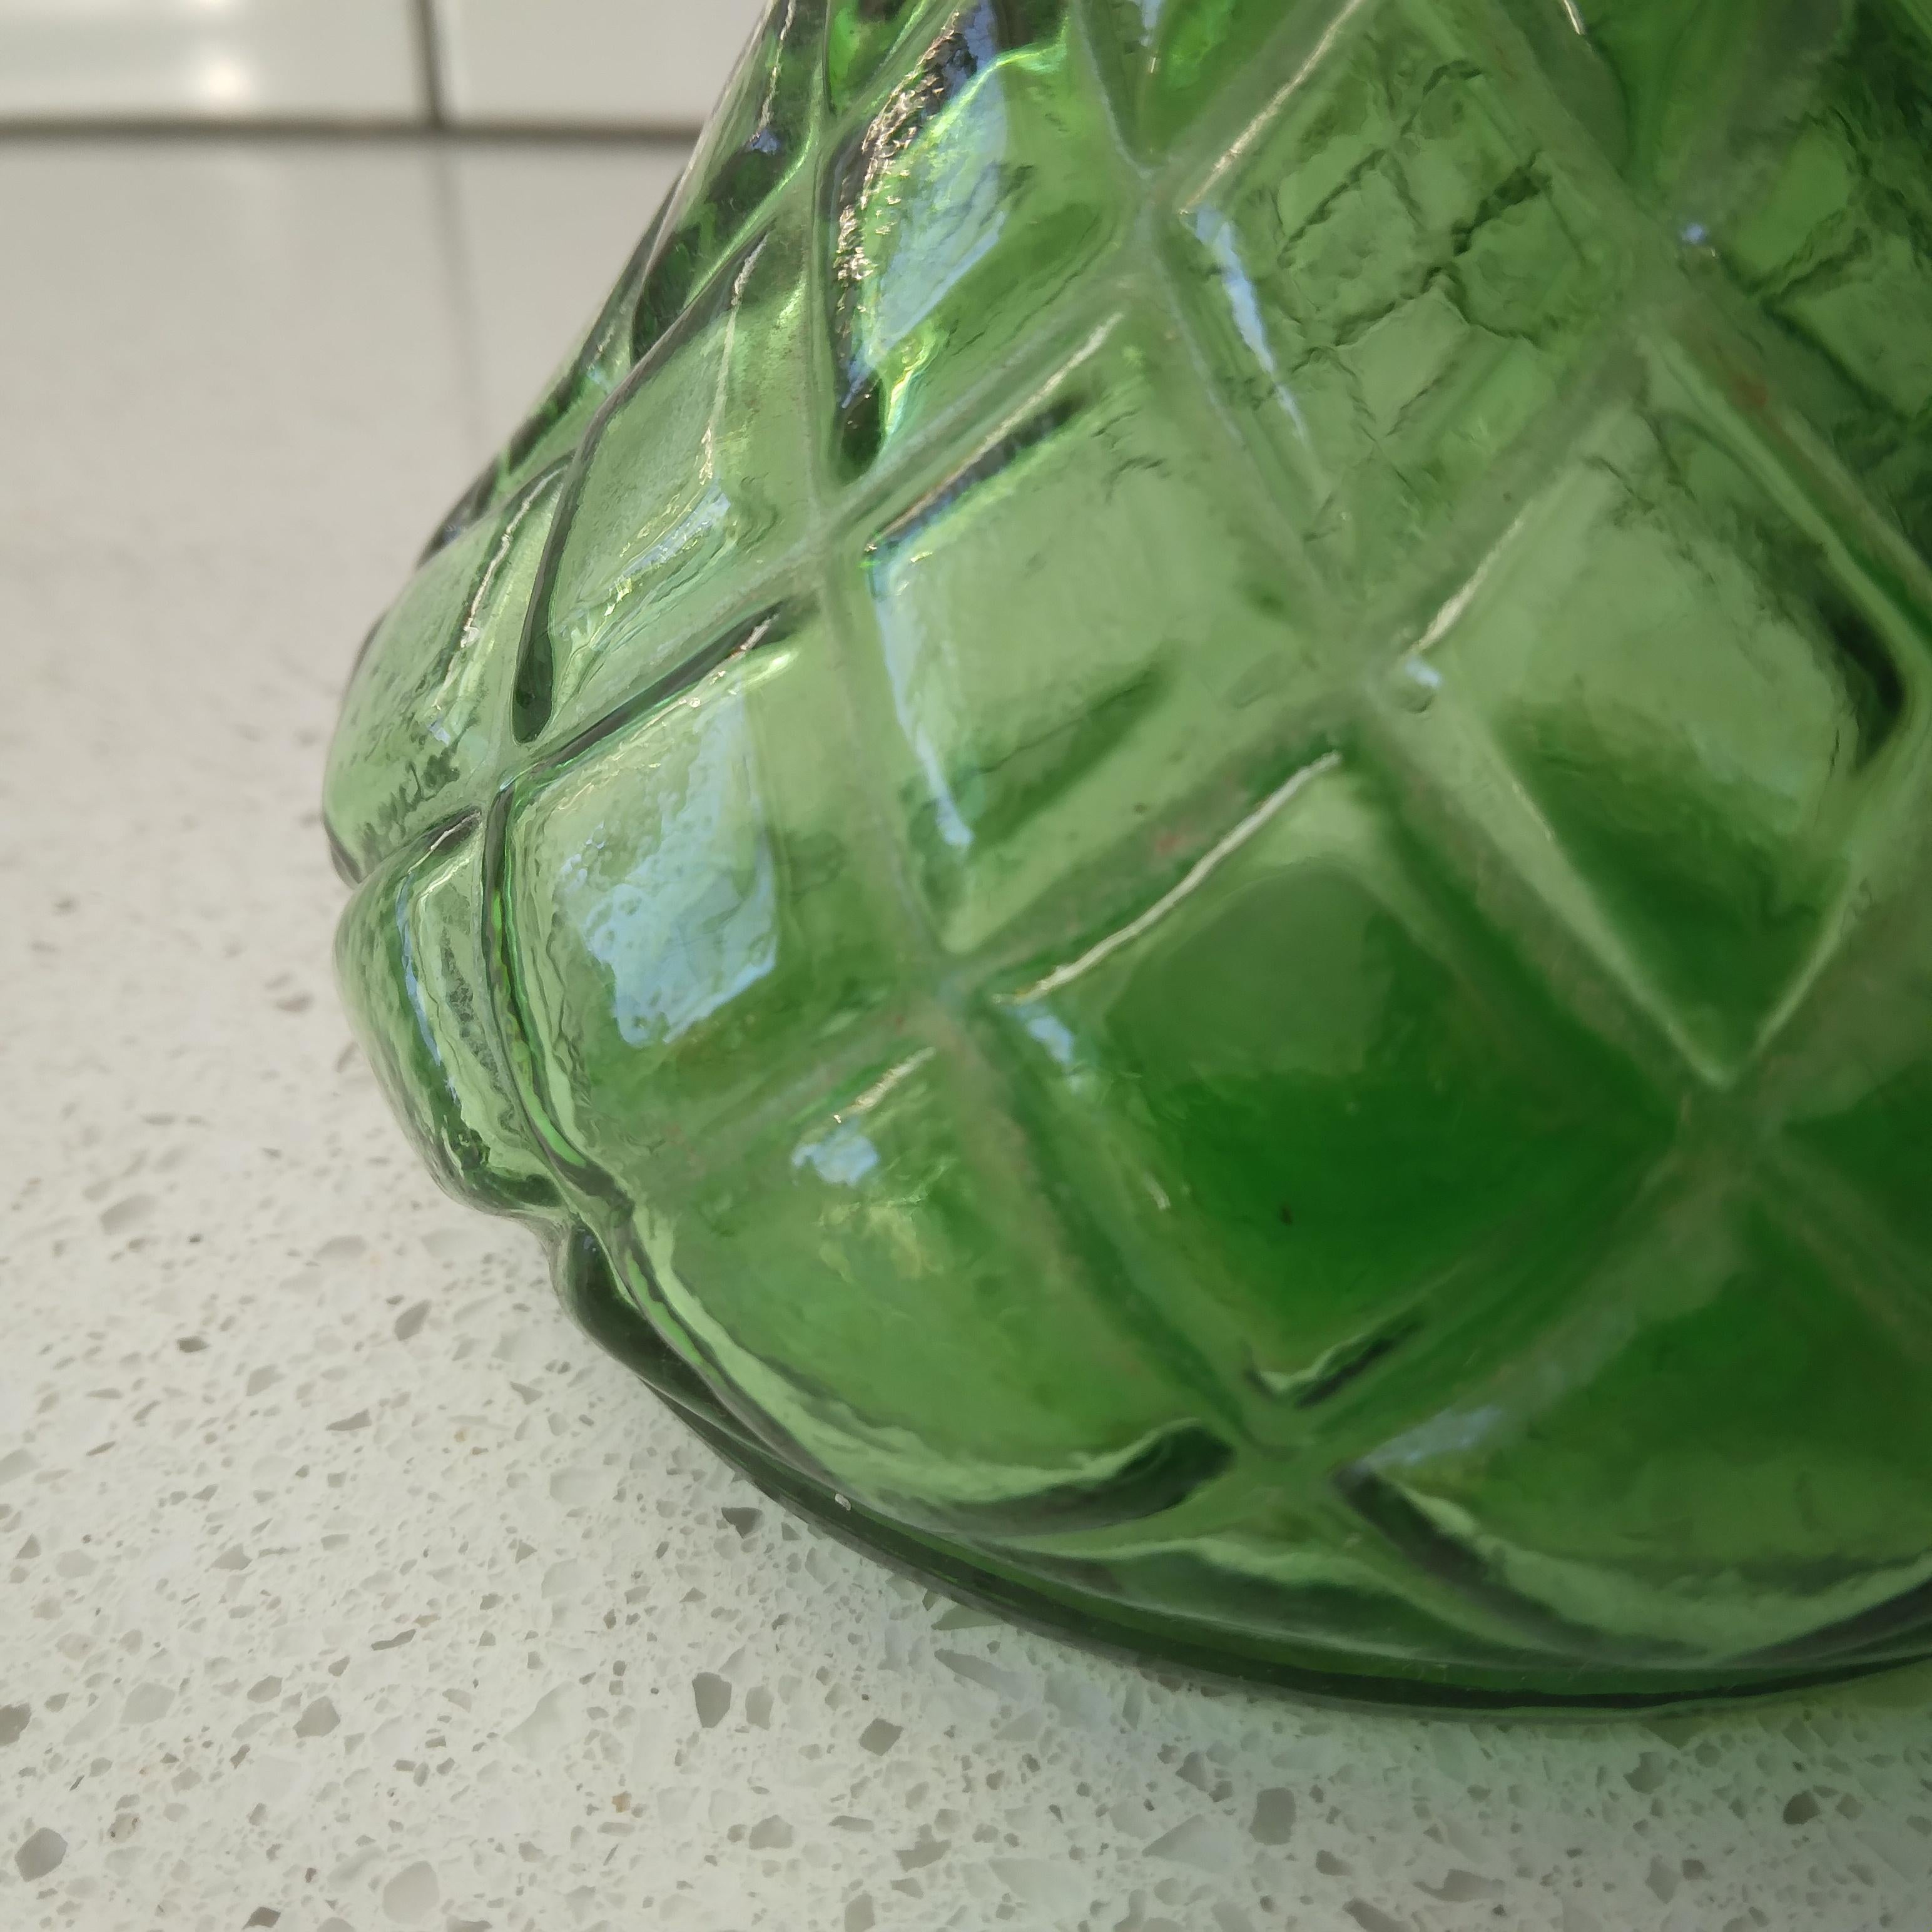 Bottle green glass in a adorable quilted diamond design, this vintage bud vase is ready to display the beauty of nature. We love her vibrant color and generous, bell-shaped curves!  

Meant to highlight the beauty of a single flower or small